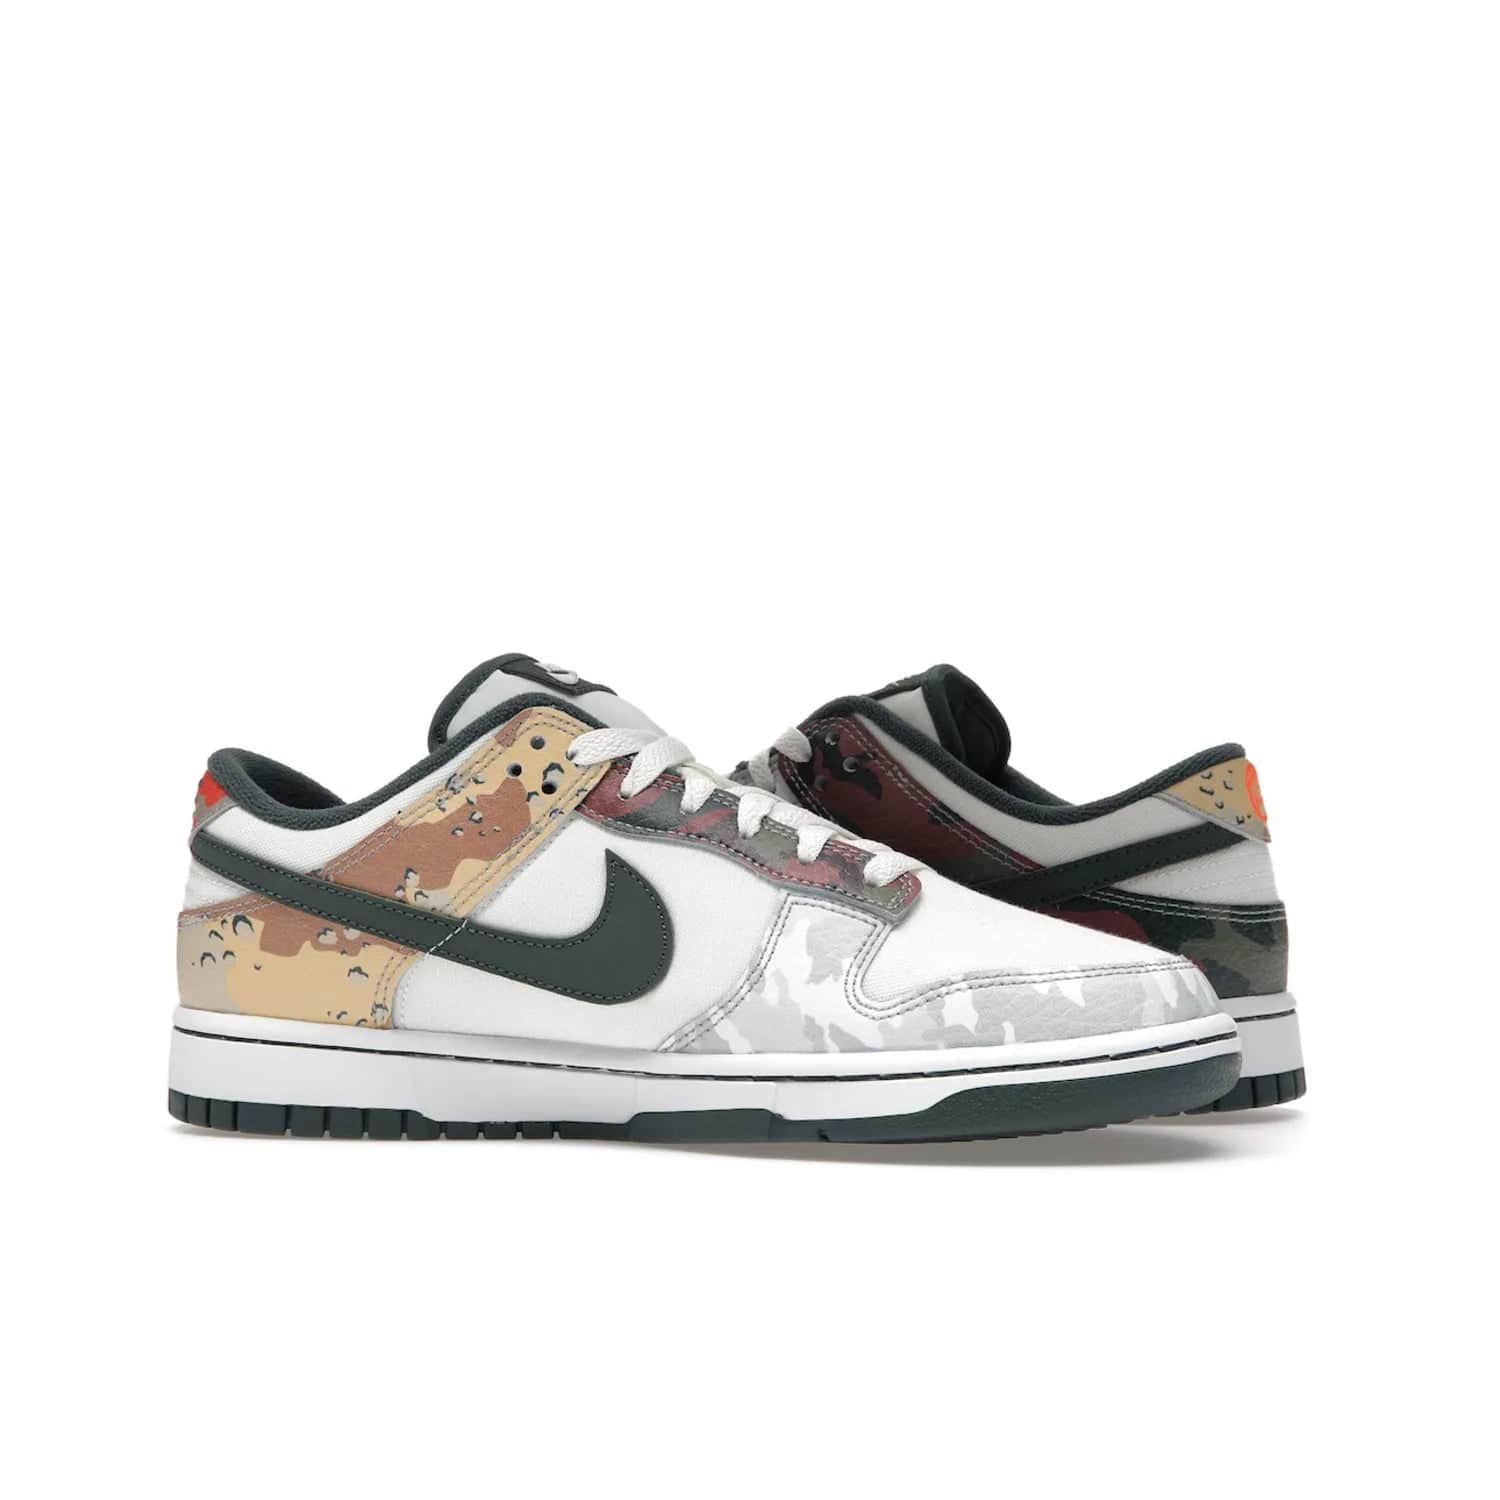 Nike Dunk Low SE Sail Multi-Camo - Image 21 - Only at www.BallersClubKickz.com - Classic design meets statement style in the Nike Dunk Low SE Sail Multi-Camo. White leather base with multi-color camo overlays, vibrant Nike Swooshes, and orange Nike embroidery. Get yours August 2021.